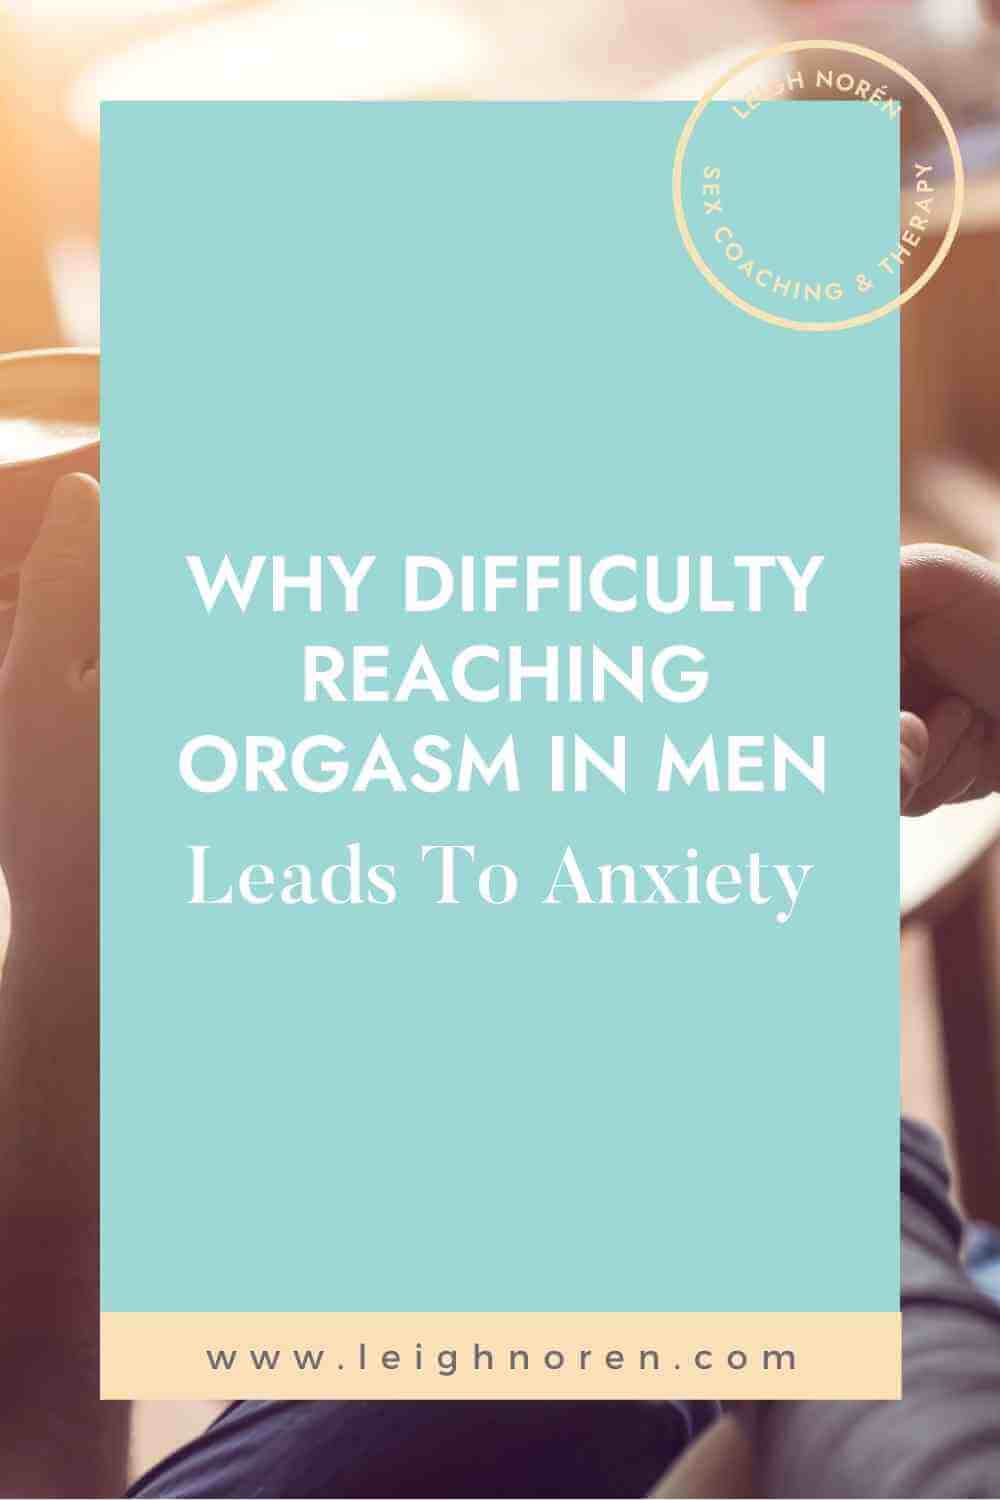 Why Difficulty Reaching Orgasm In Men Leads To Anxiety